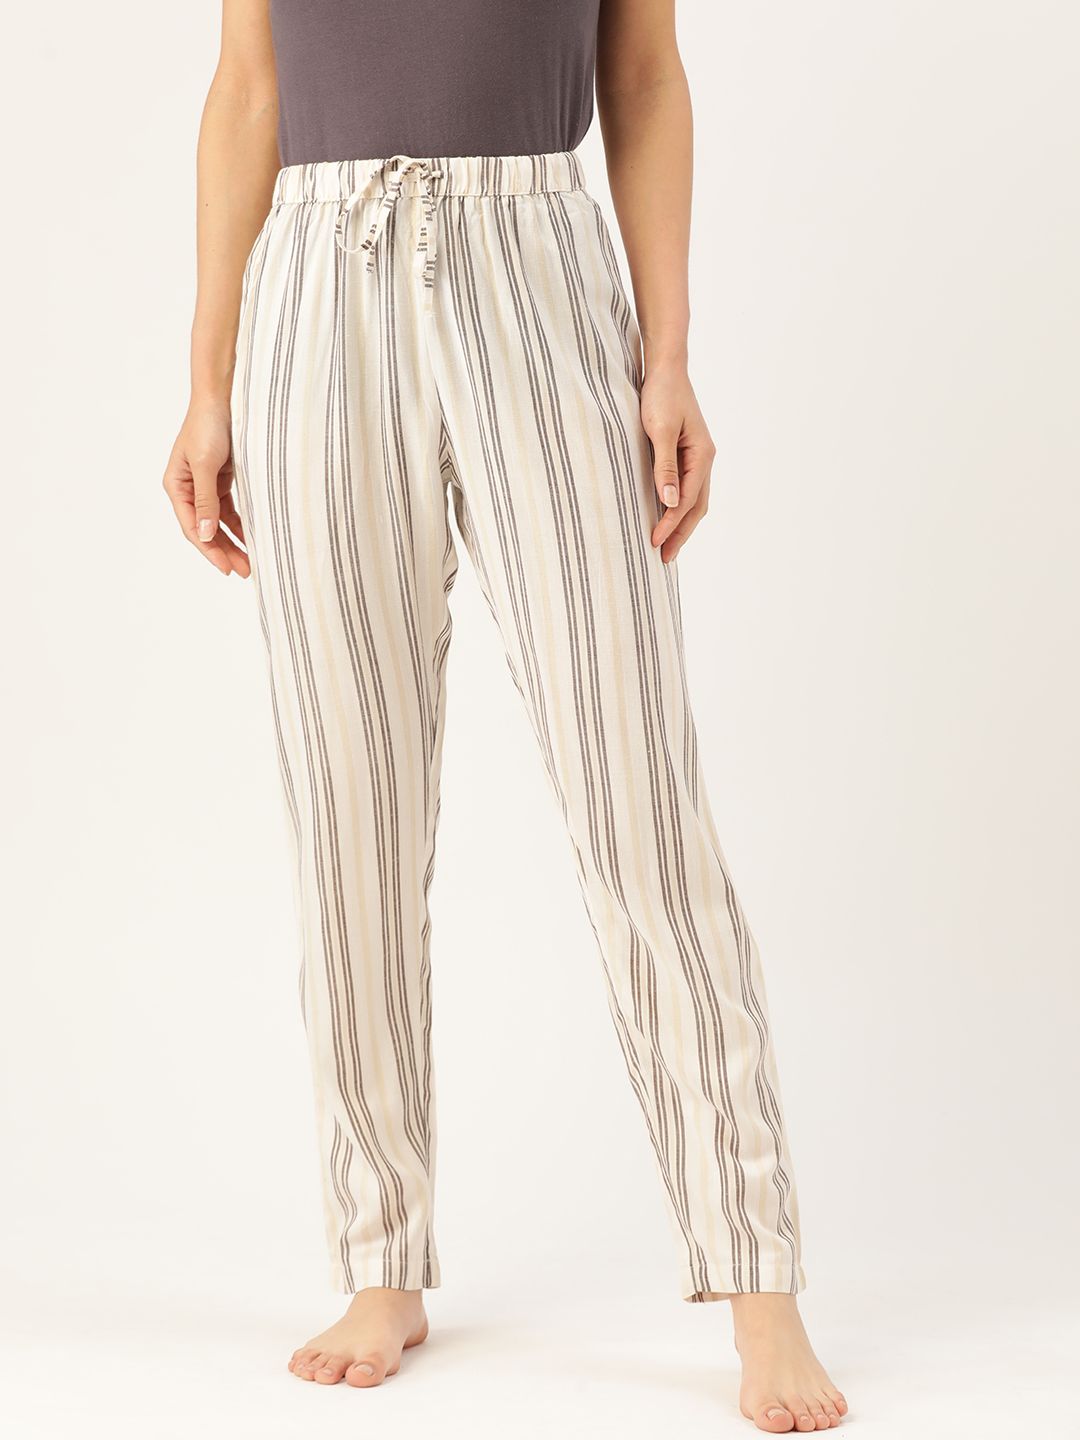 ETC Women Off-White & Charcoal Grey Striped Lounge Pants Price in India